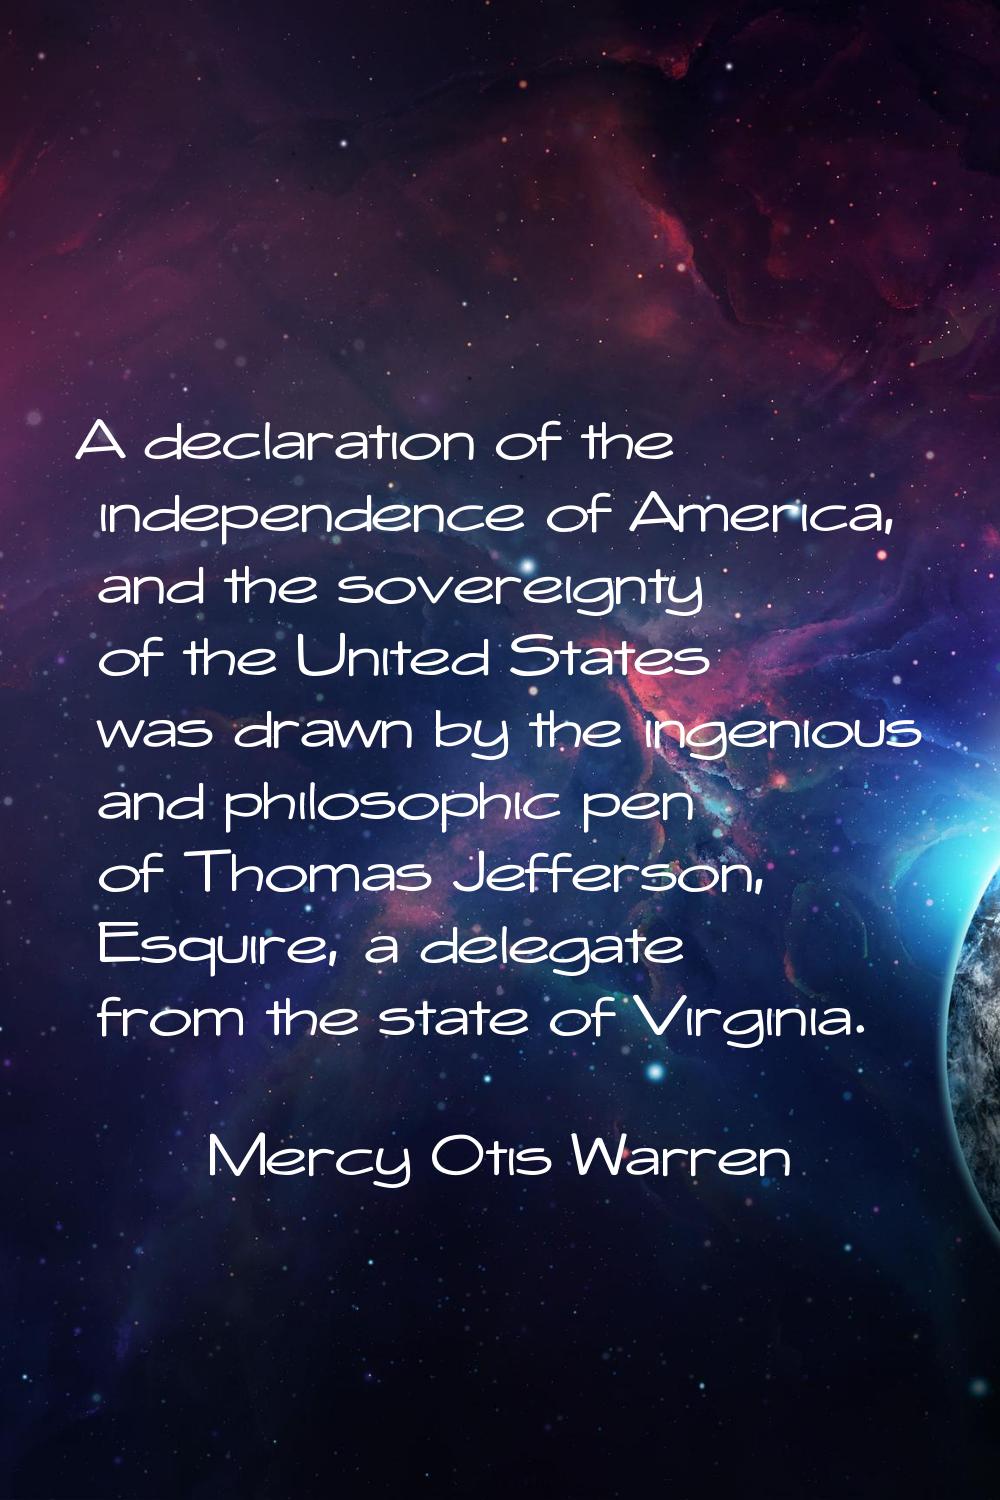 A declaration of the independence of America, and the sovereignty of the United States was drawn by